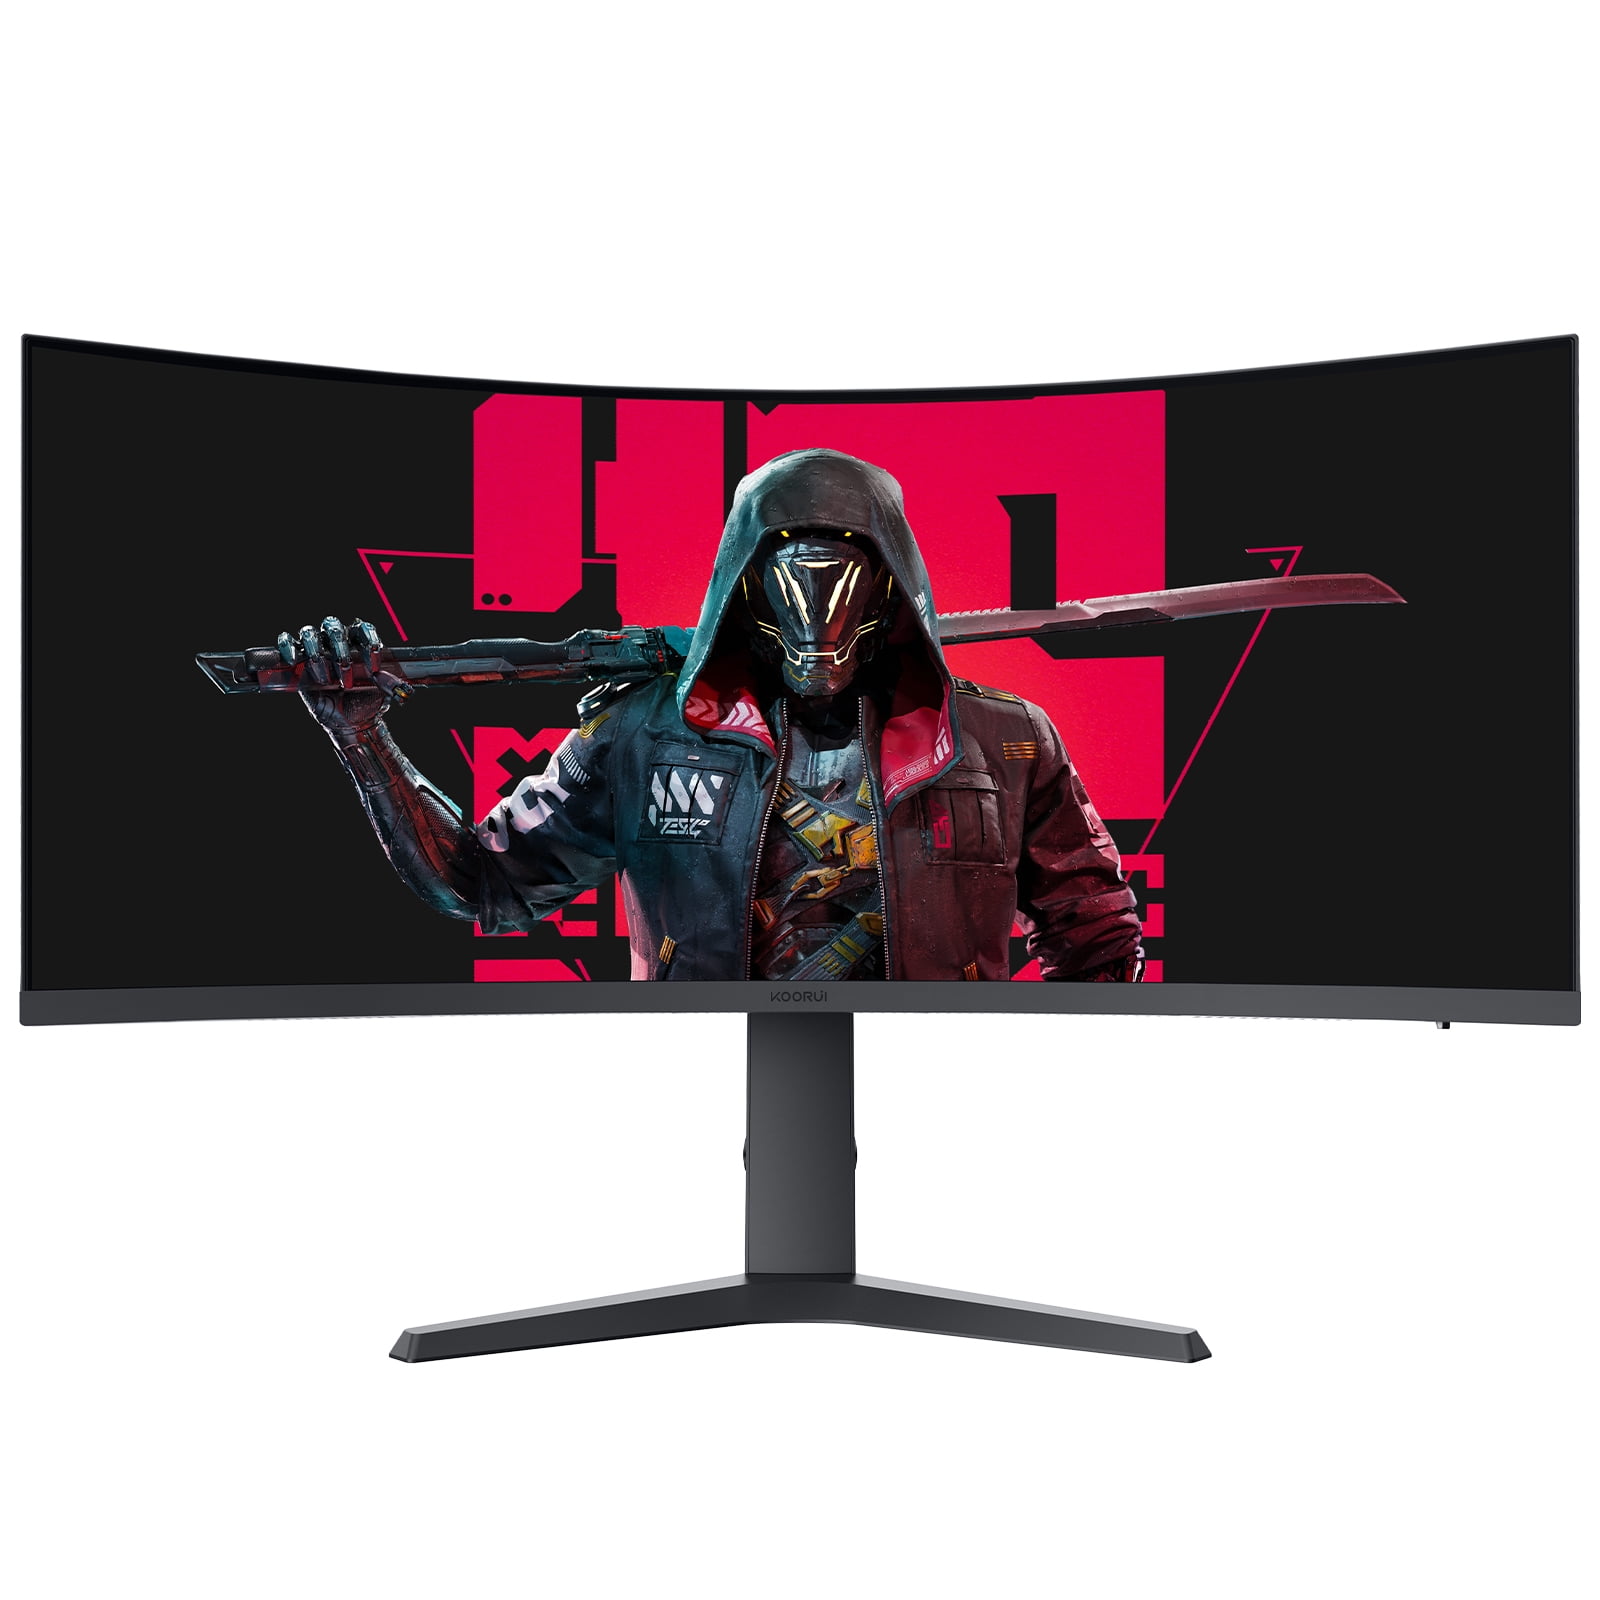 LG 34GN850-B 34 Inch 21: 9 UltraGear Curved QHD (3440 x 1440) 1ms Nano IPS Gaming  Monitor with 144Hz and G-SYNC Compatibility - Black (34GN850-B)